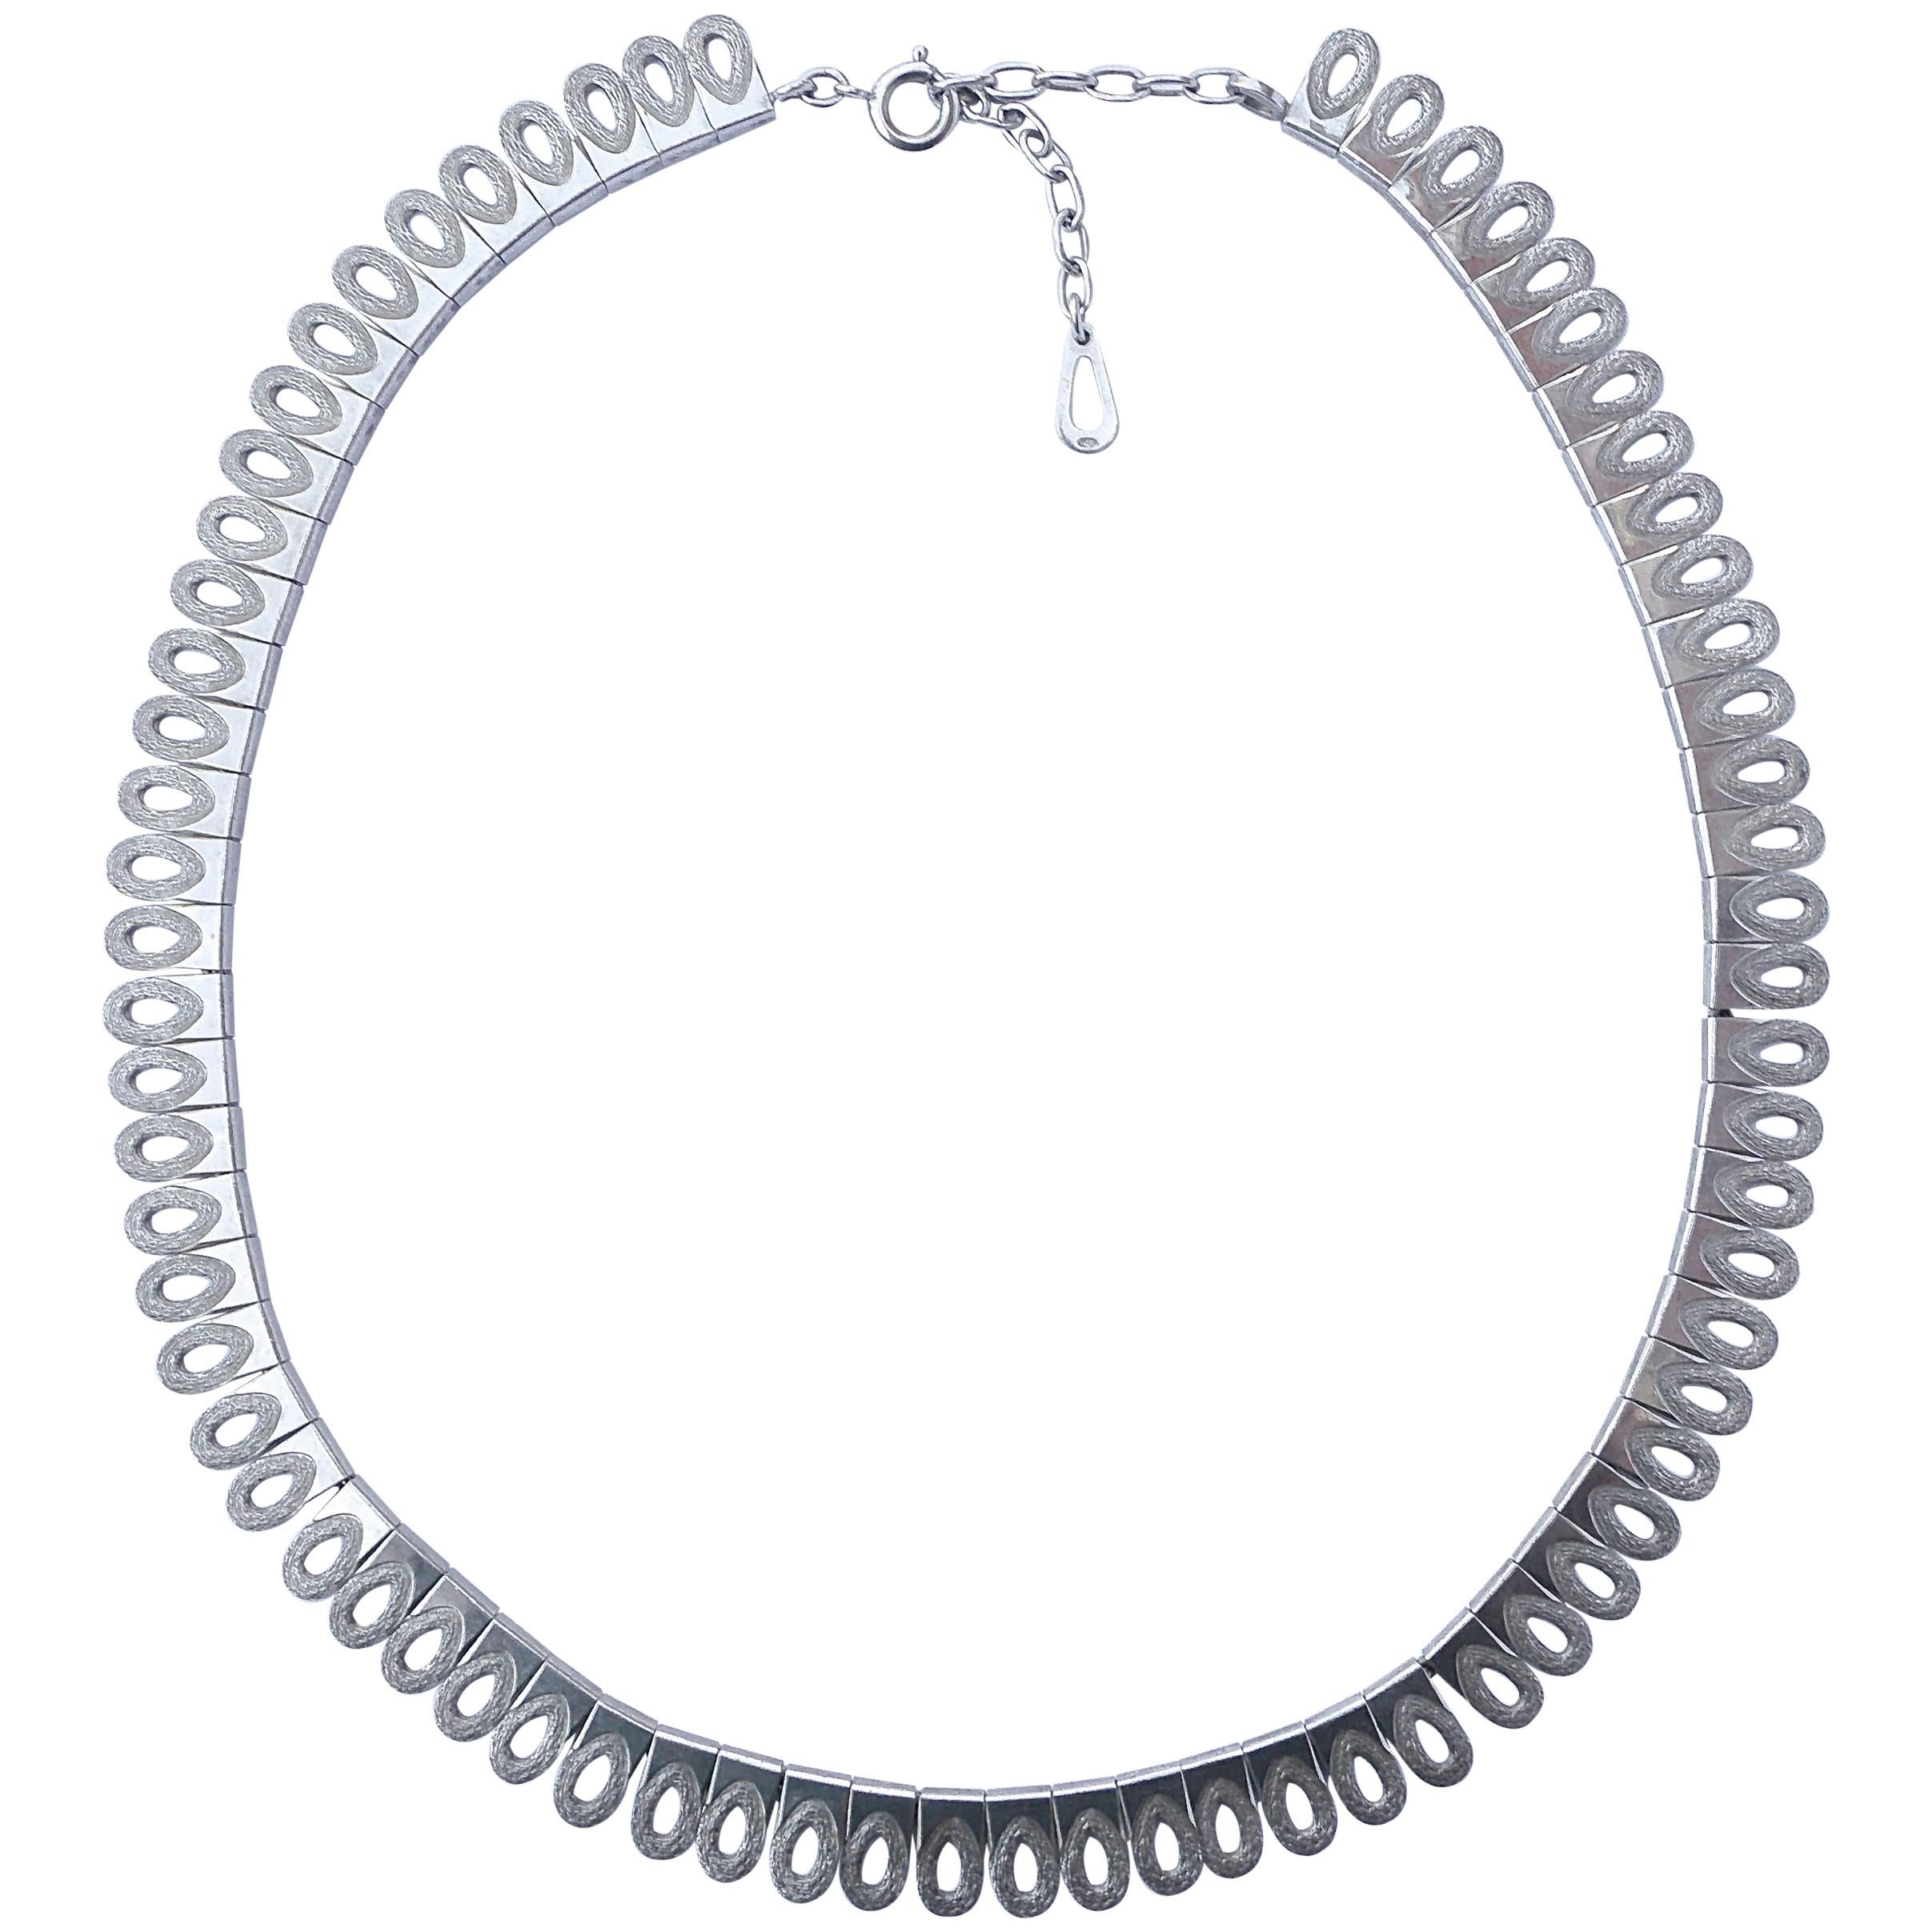 1970s Sterling Silver Shiny and Textured Oval Design Necklace, London import 